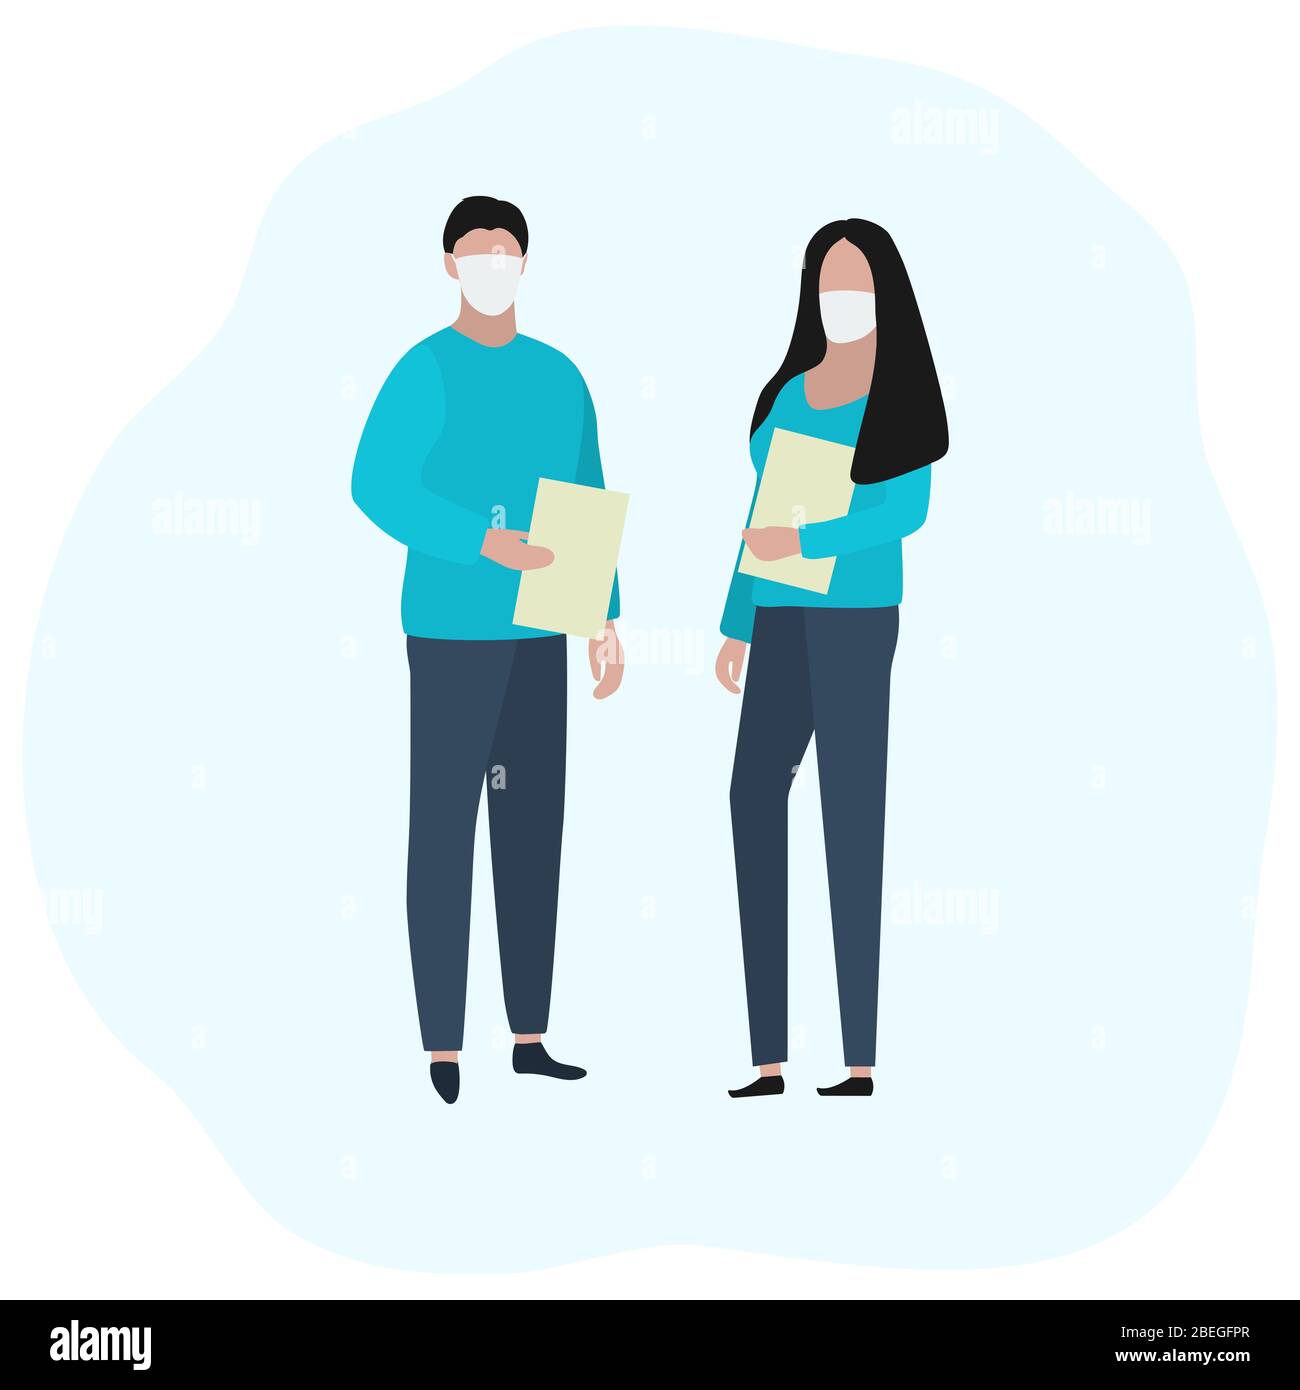 Man and woman with documents in medical masks. Fashion trendy illustration, flat design. Pandemic and epidemic of coronavirus in the world Stock Vector